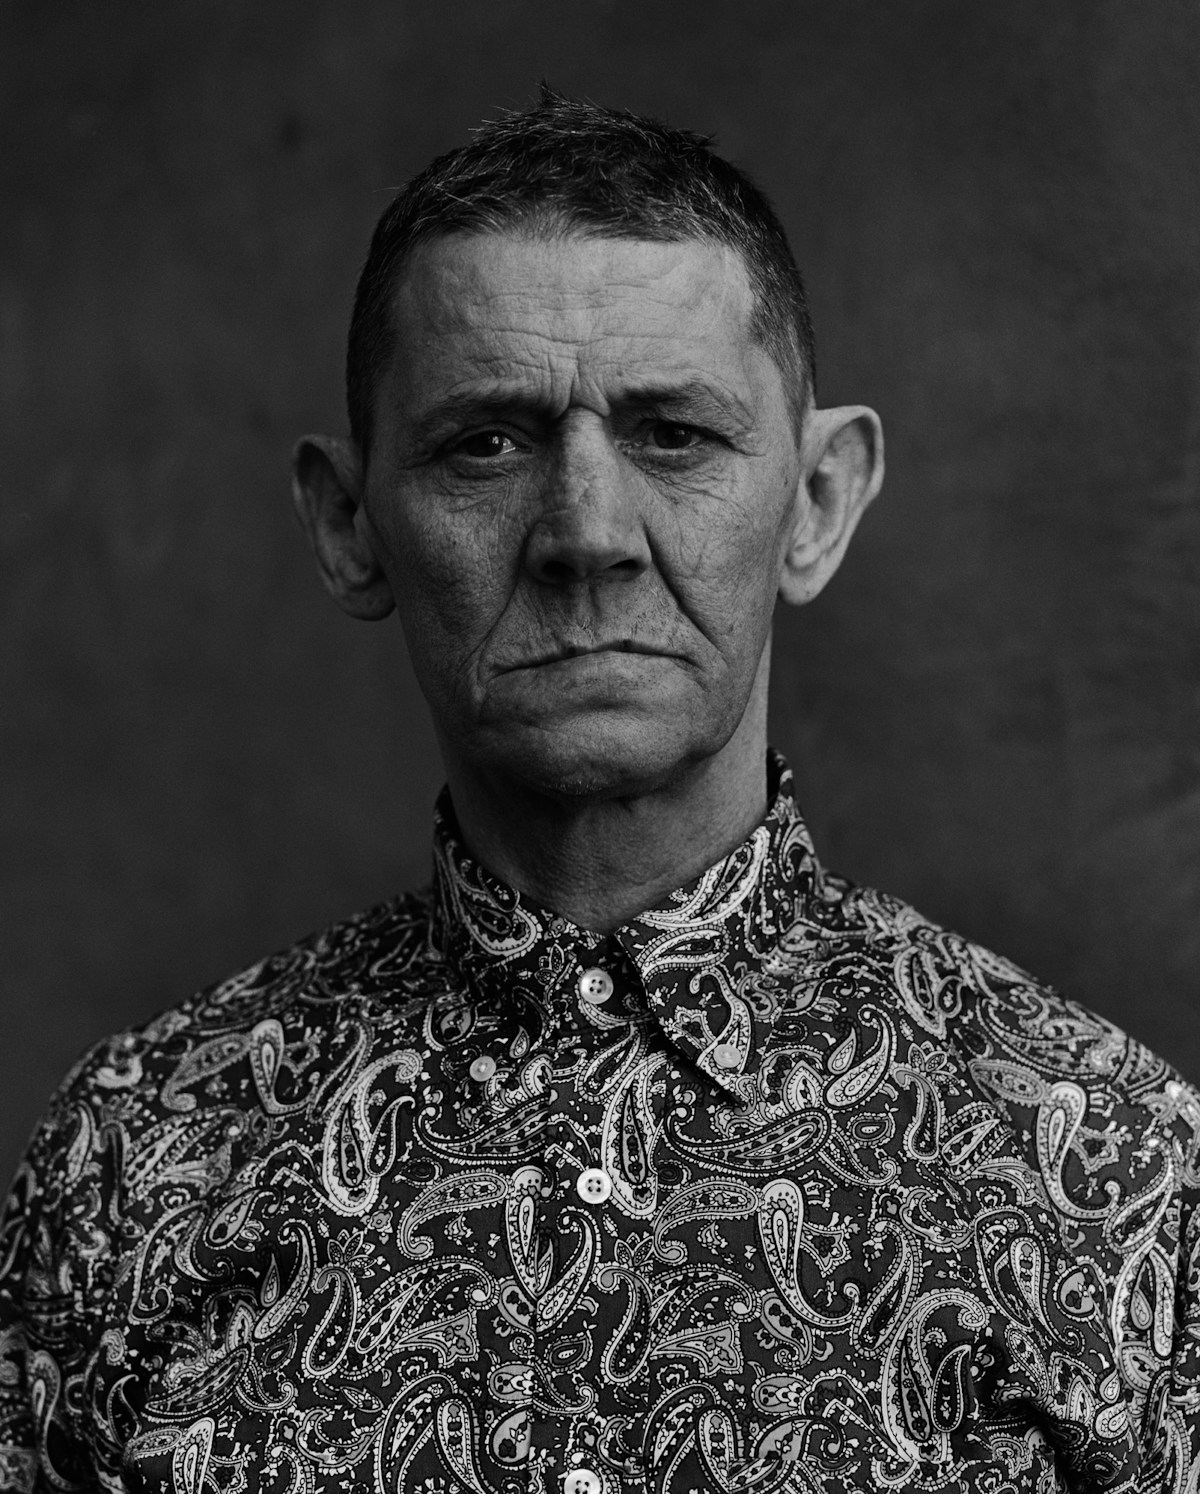 A man dressed in a patterned shirt stares at the camera.